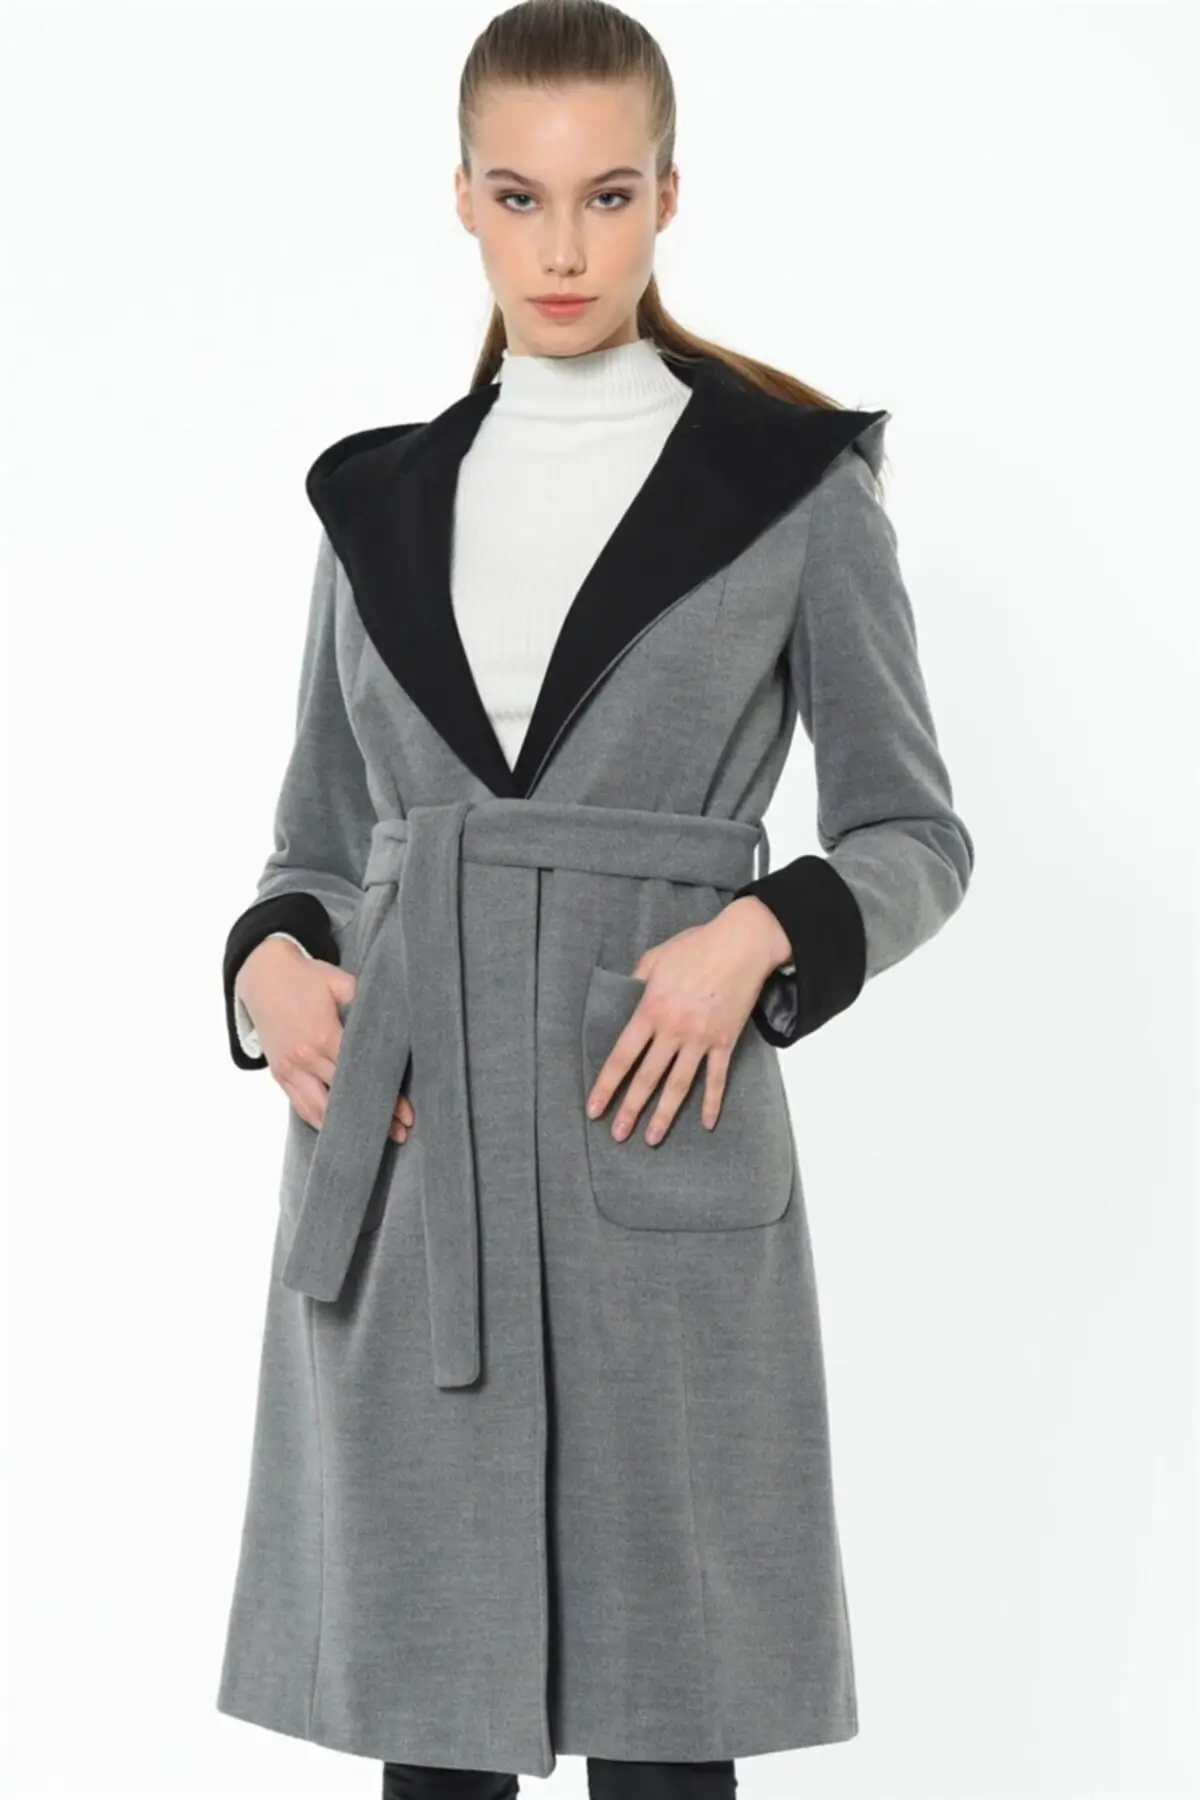 Women's Coats Gray Hooded Long Sleeve Belted Thick Stylish Elegant Useful 2021 Winter Autumn Fashion Outerwear Coats